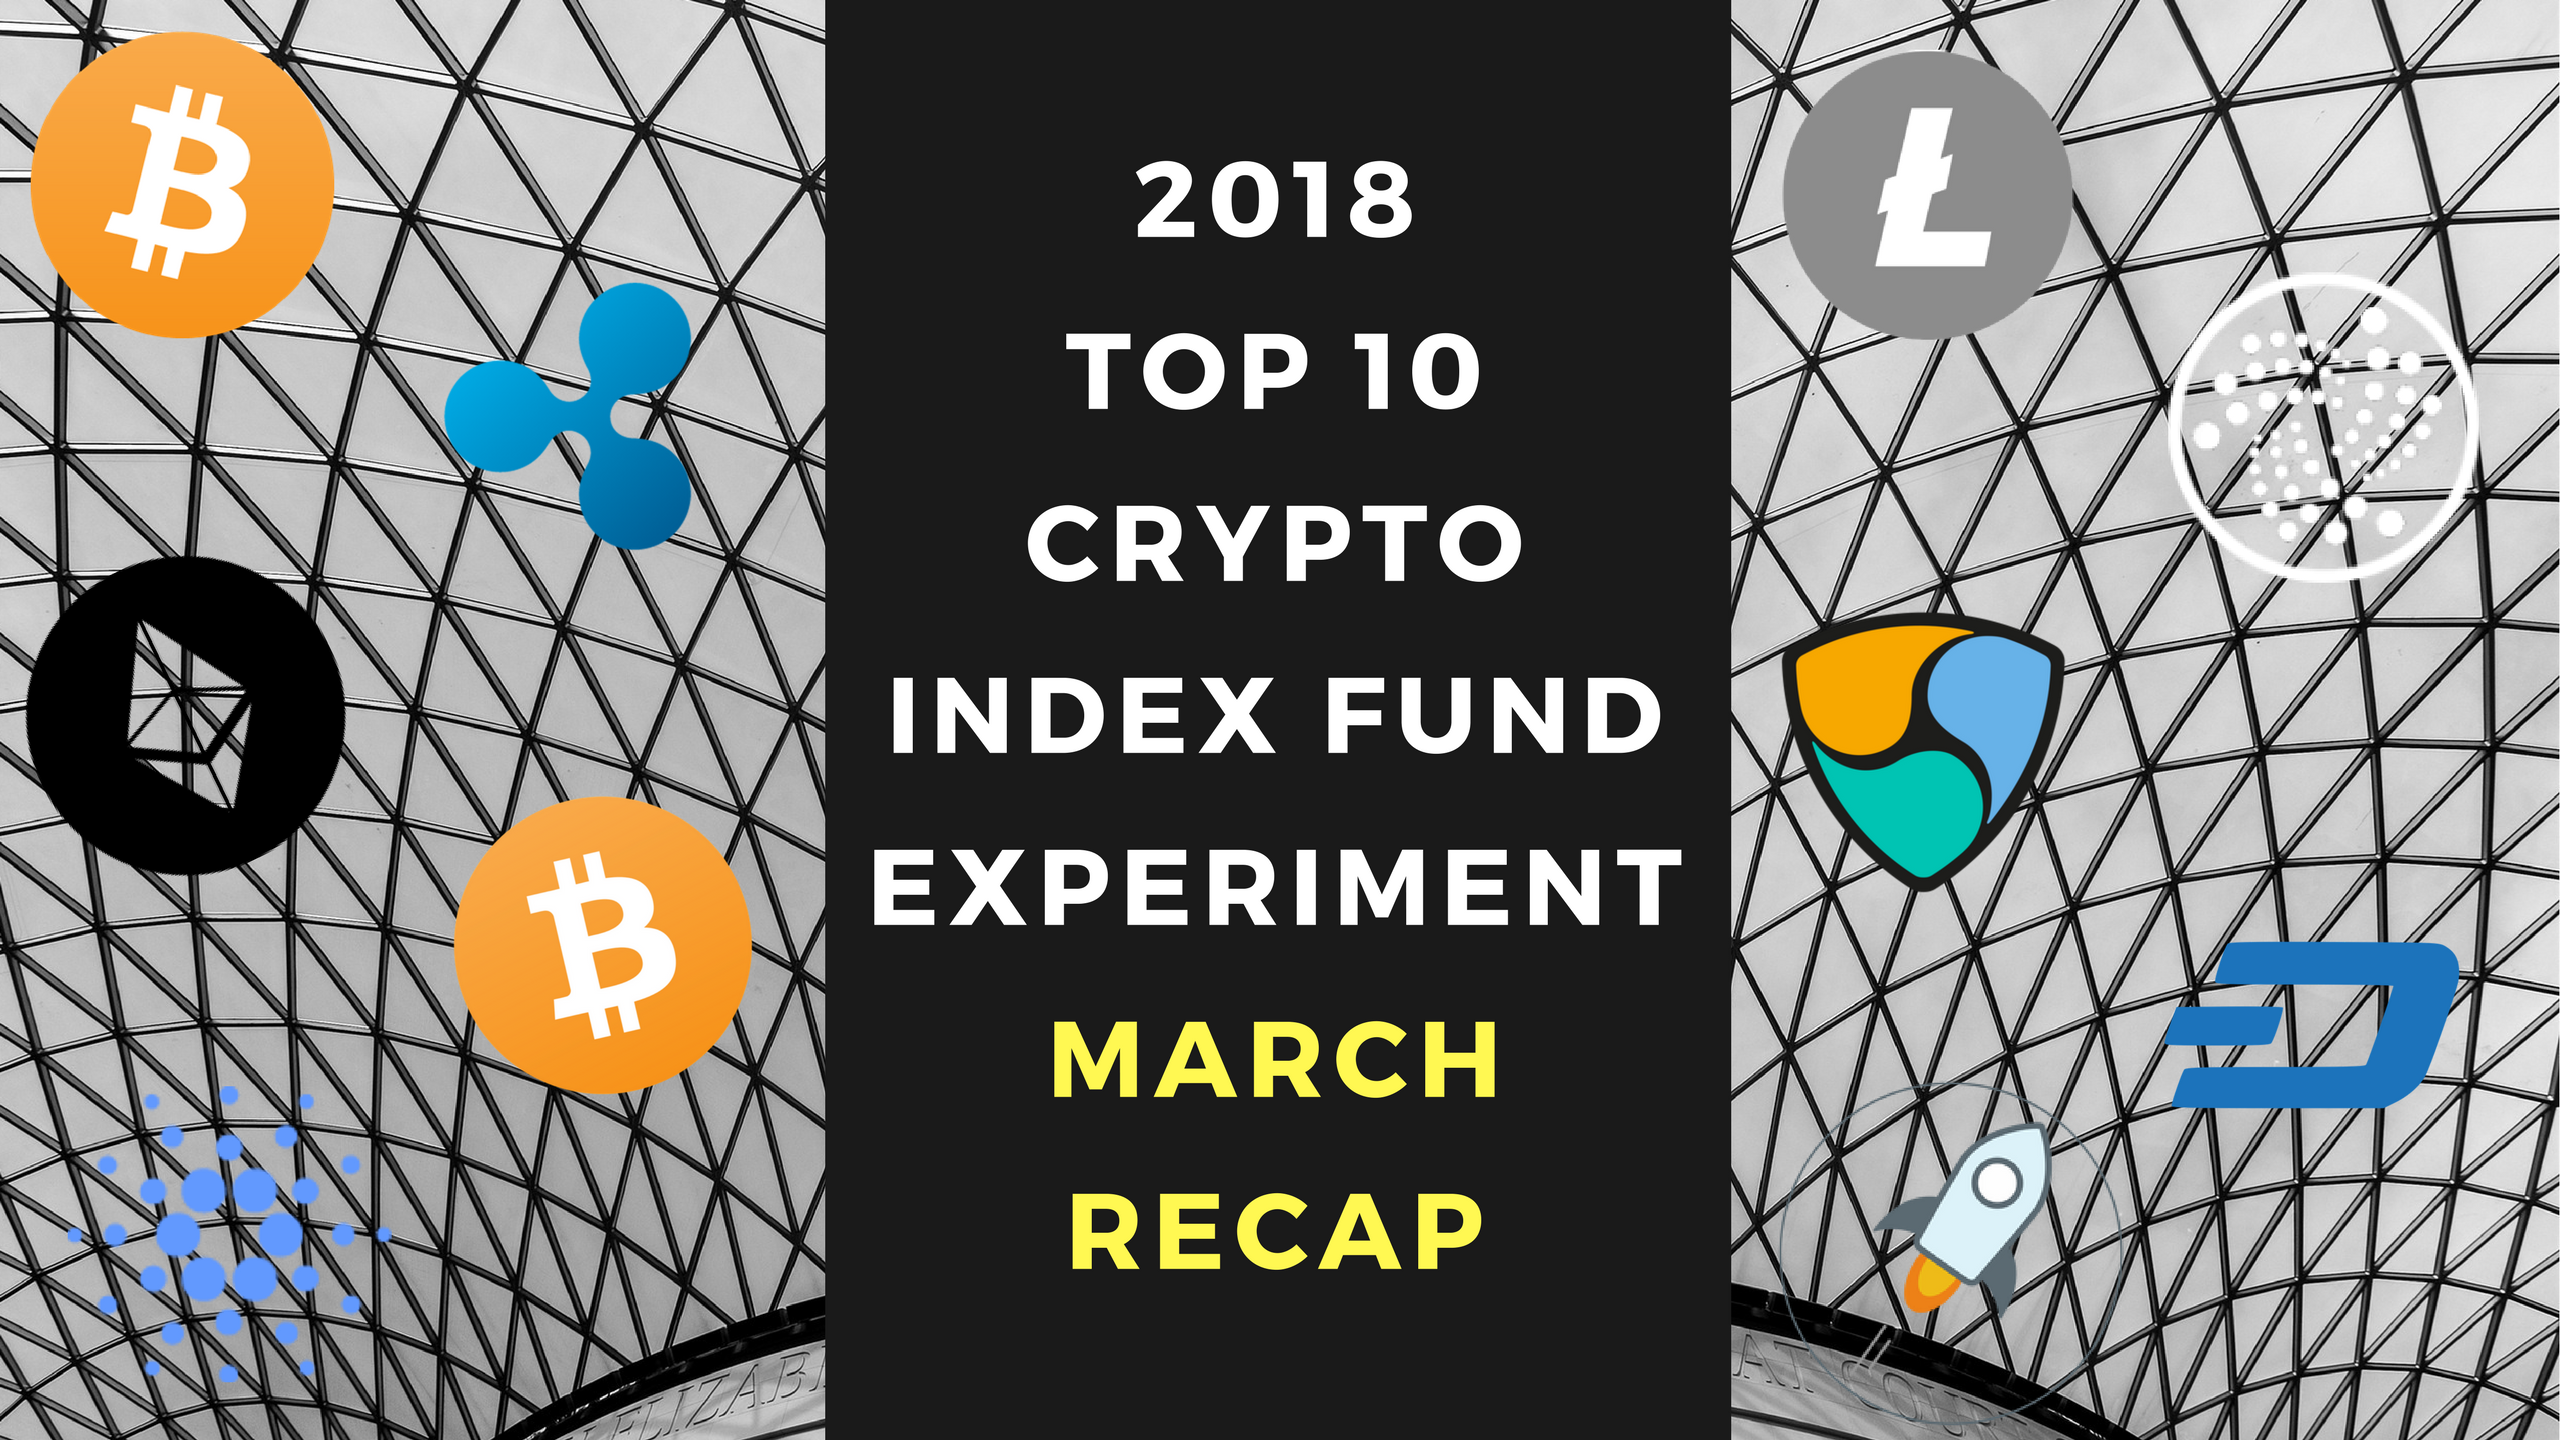 2018 Top 10 Crypto Index Fund Experiment MARCH RECAP.png